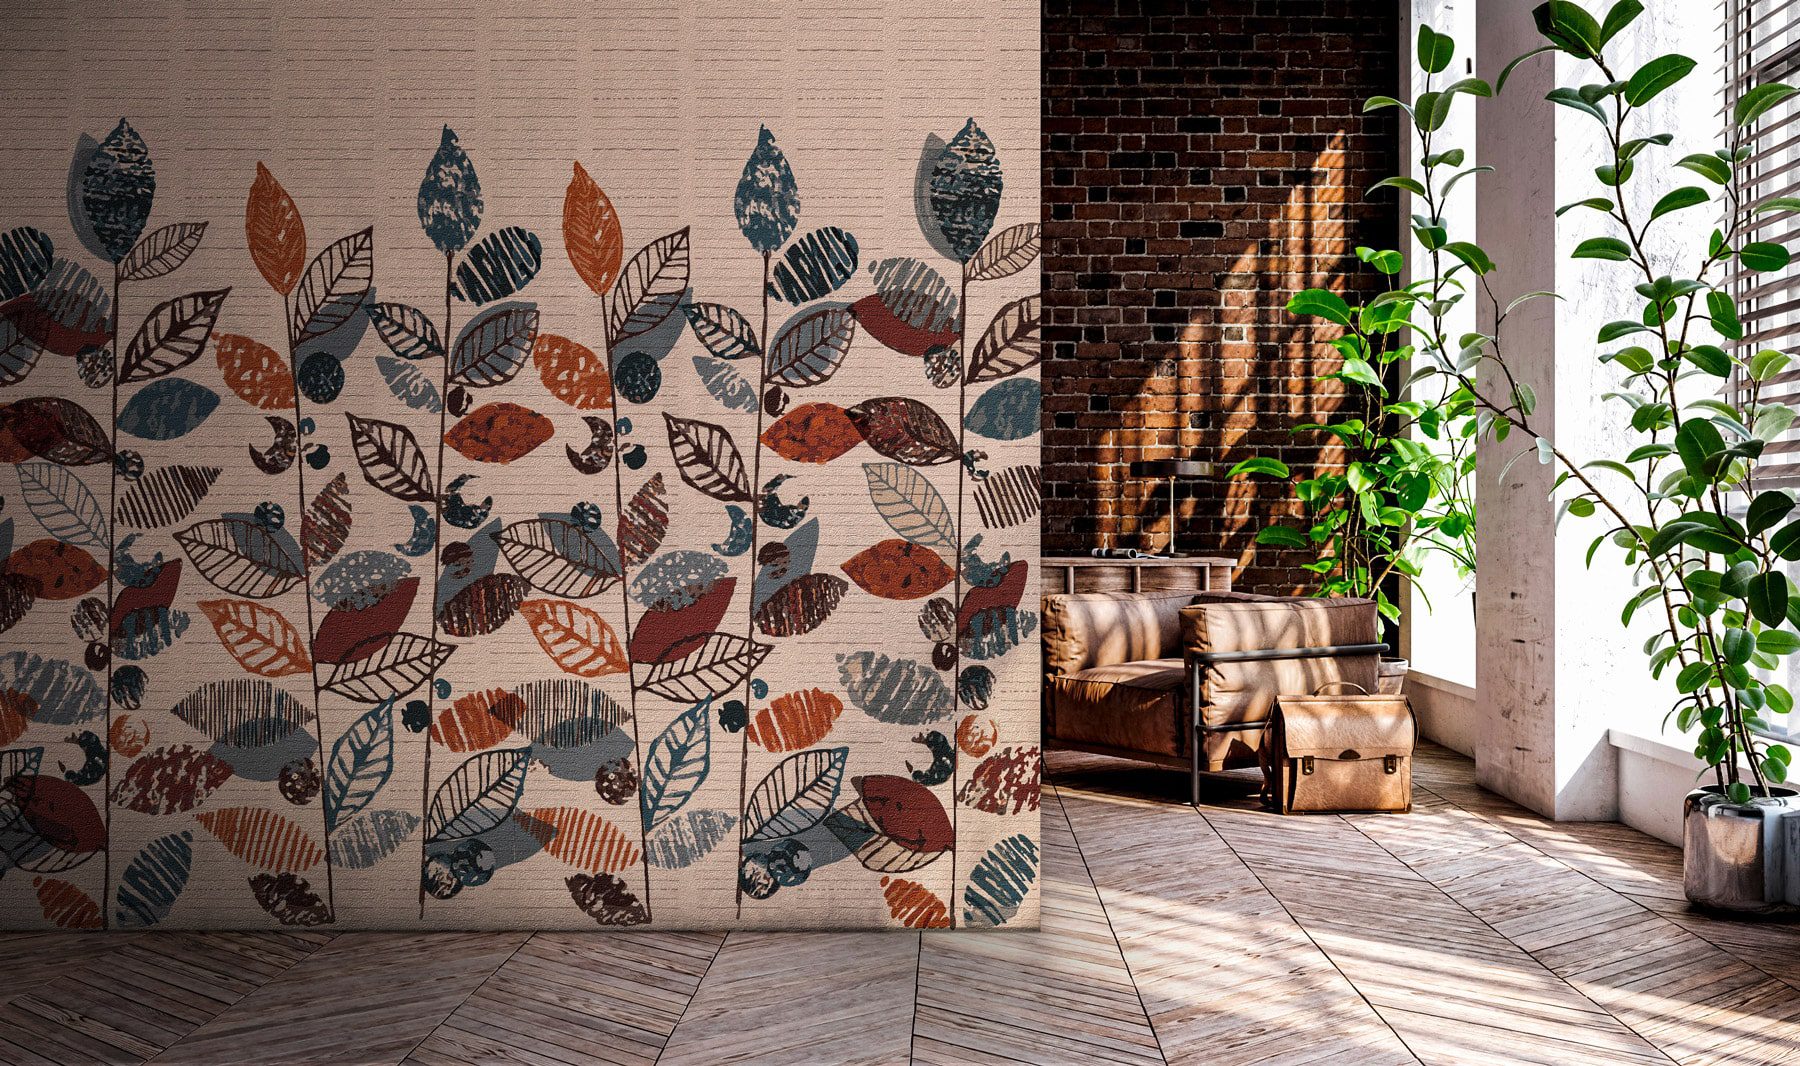 Be inspired by the Vintage style with the 70s Wallpaper. Discover the exclusive collection of Instabilelab Vintage Wallpapers.